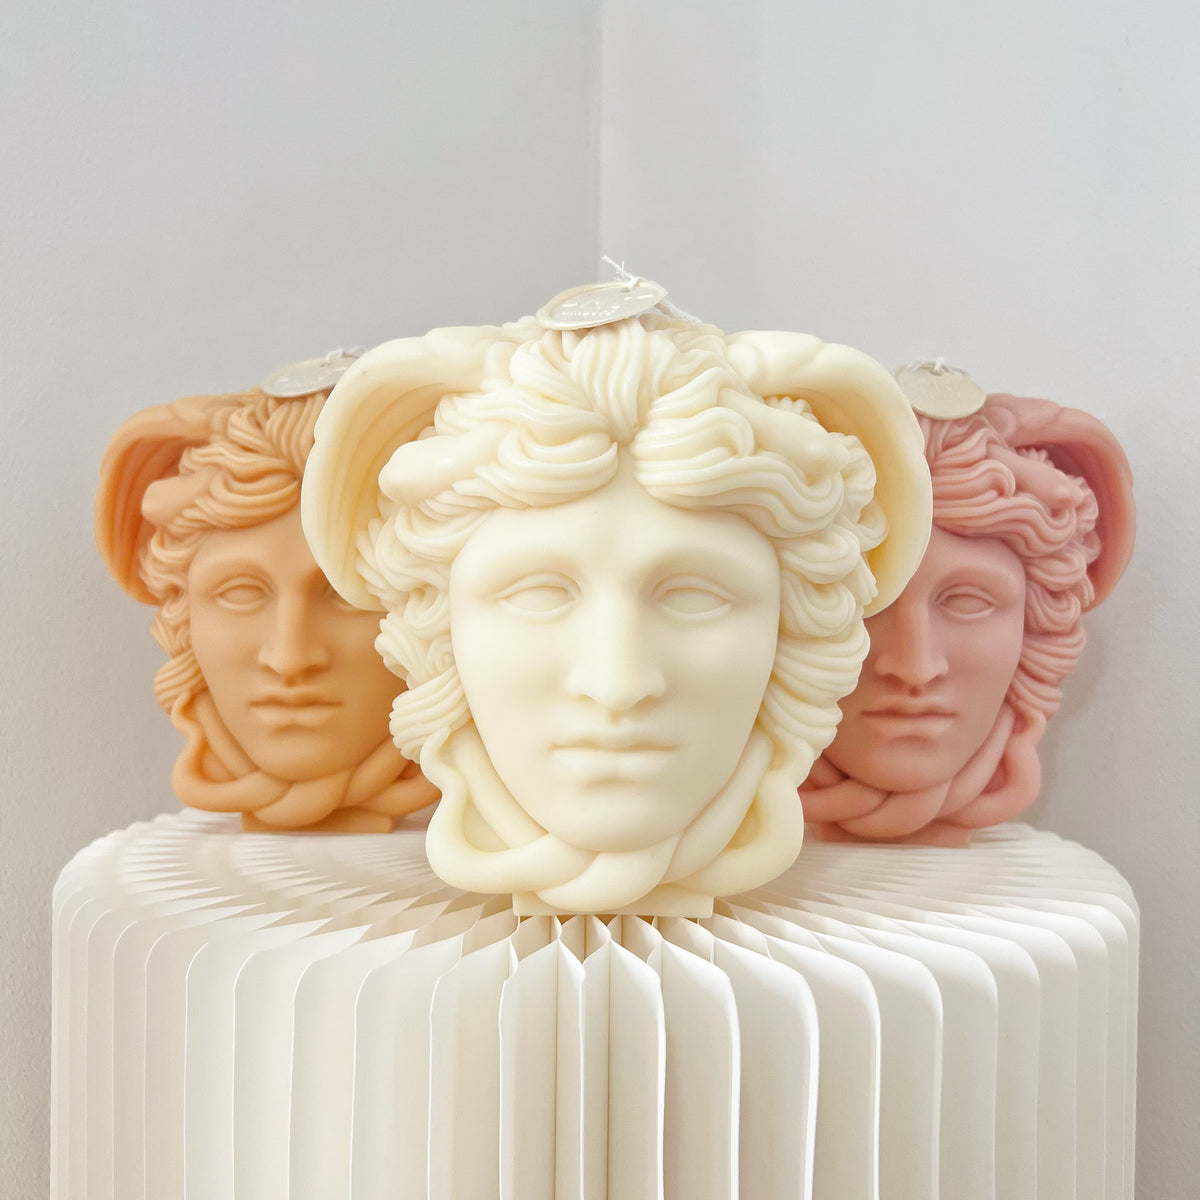 Handmade soy wax body-shaped candles in various sizes and textures, including a Medusa bust, female torso, and self-love candle, for unique home décor | LMJ Candles.